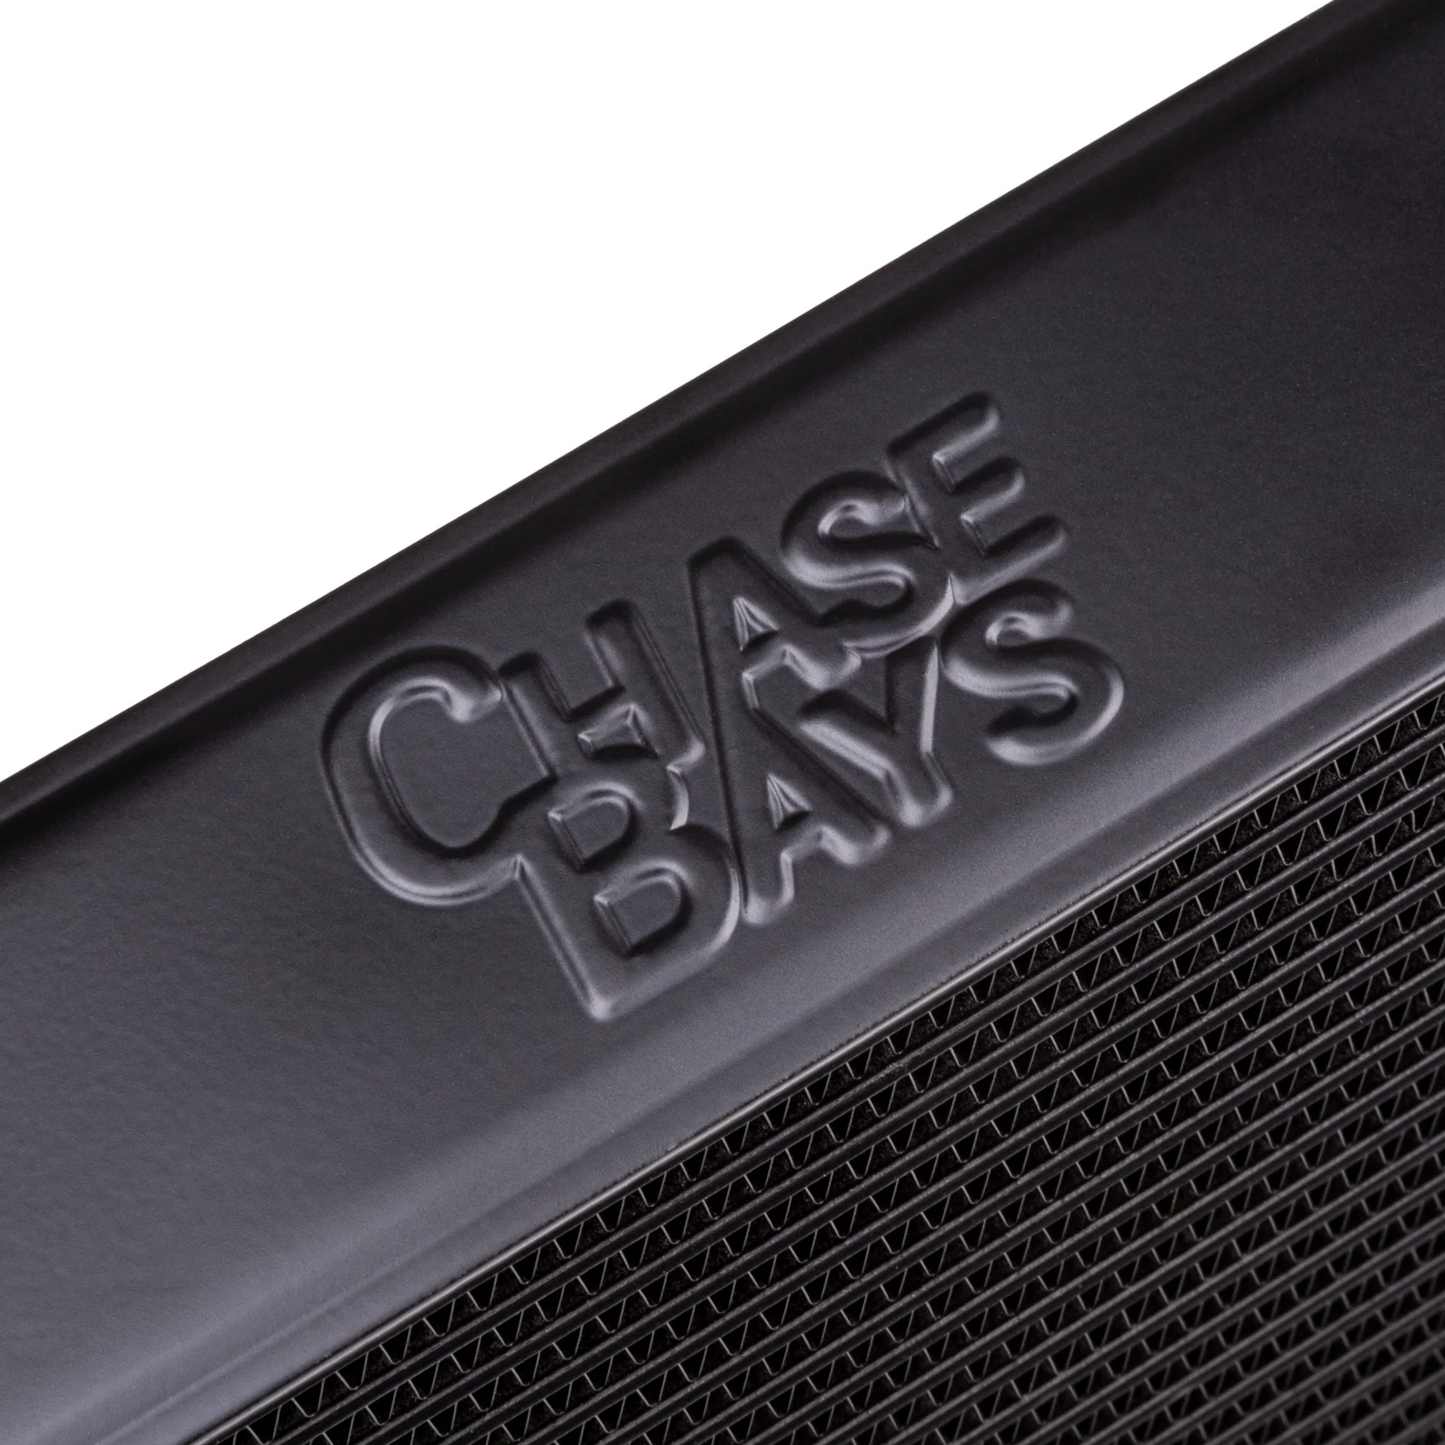 Chase Bays - Chase Bays Oil Cooler